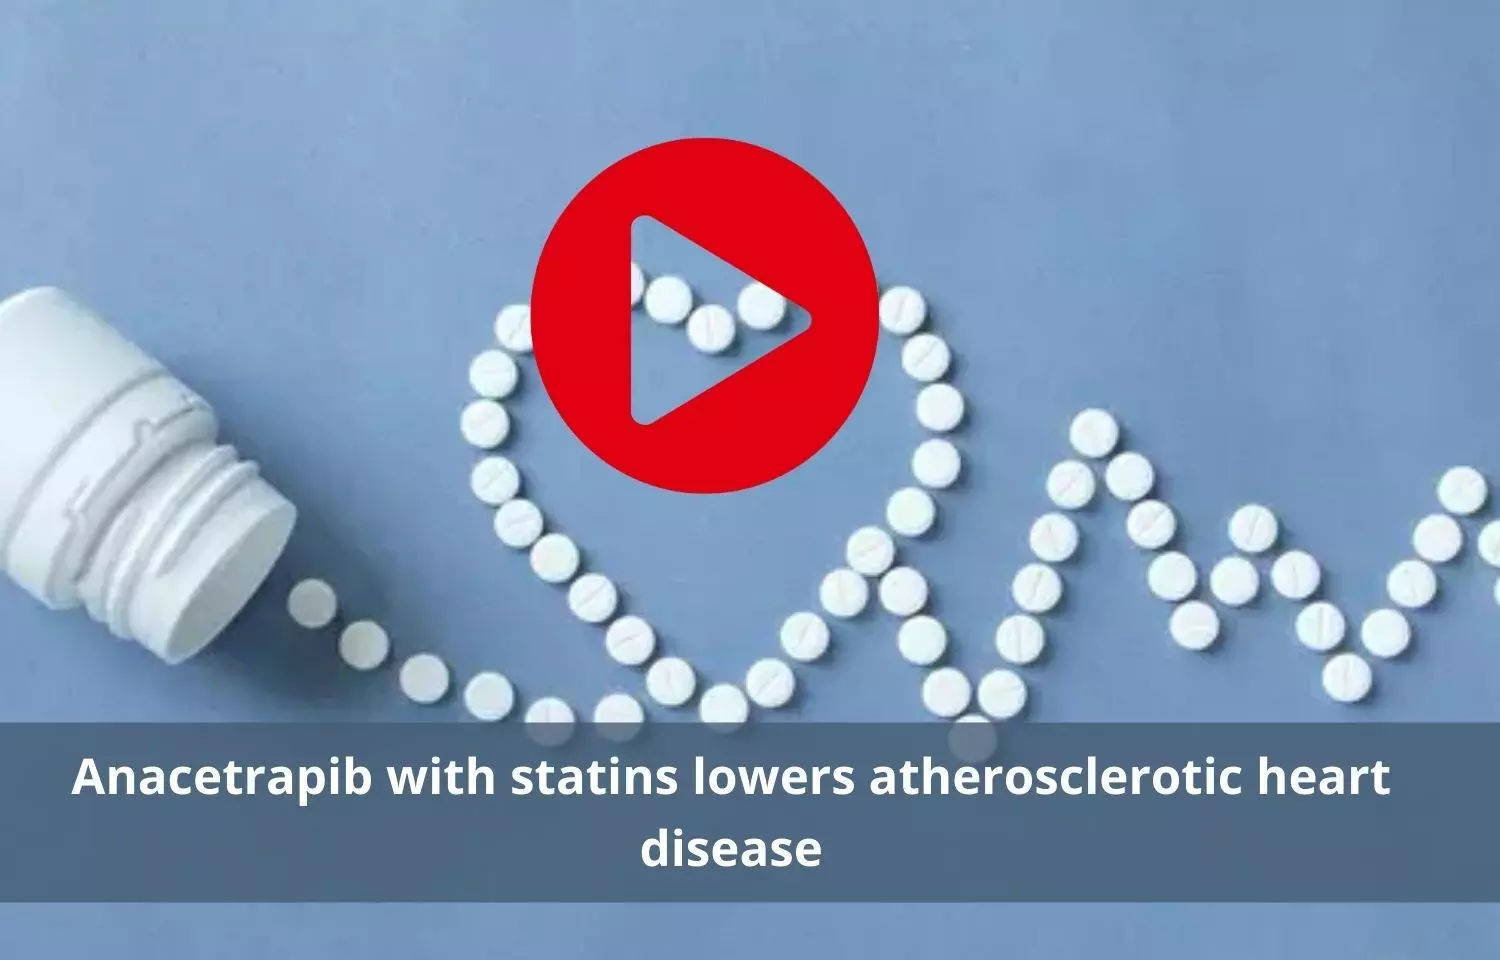 Anacetrapib with statins to lower atherosclerotic heart disease